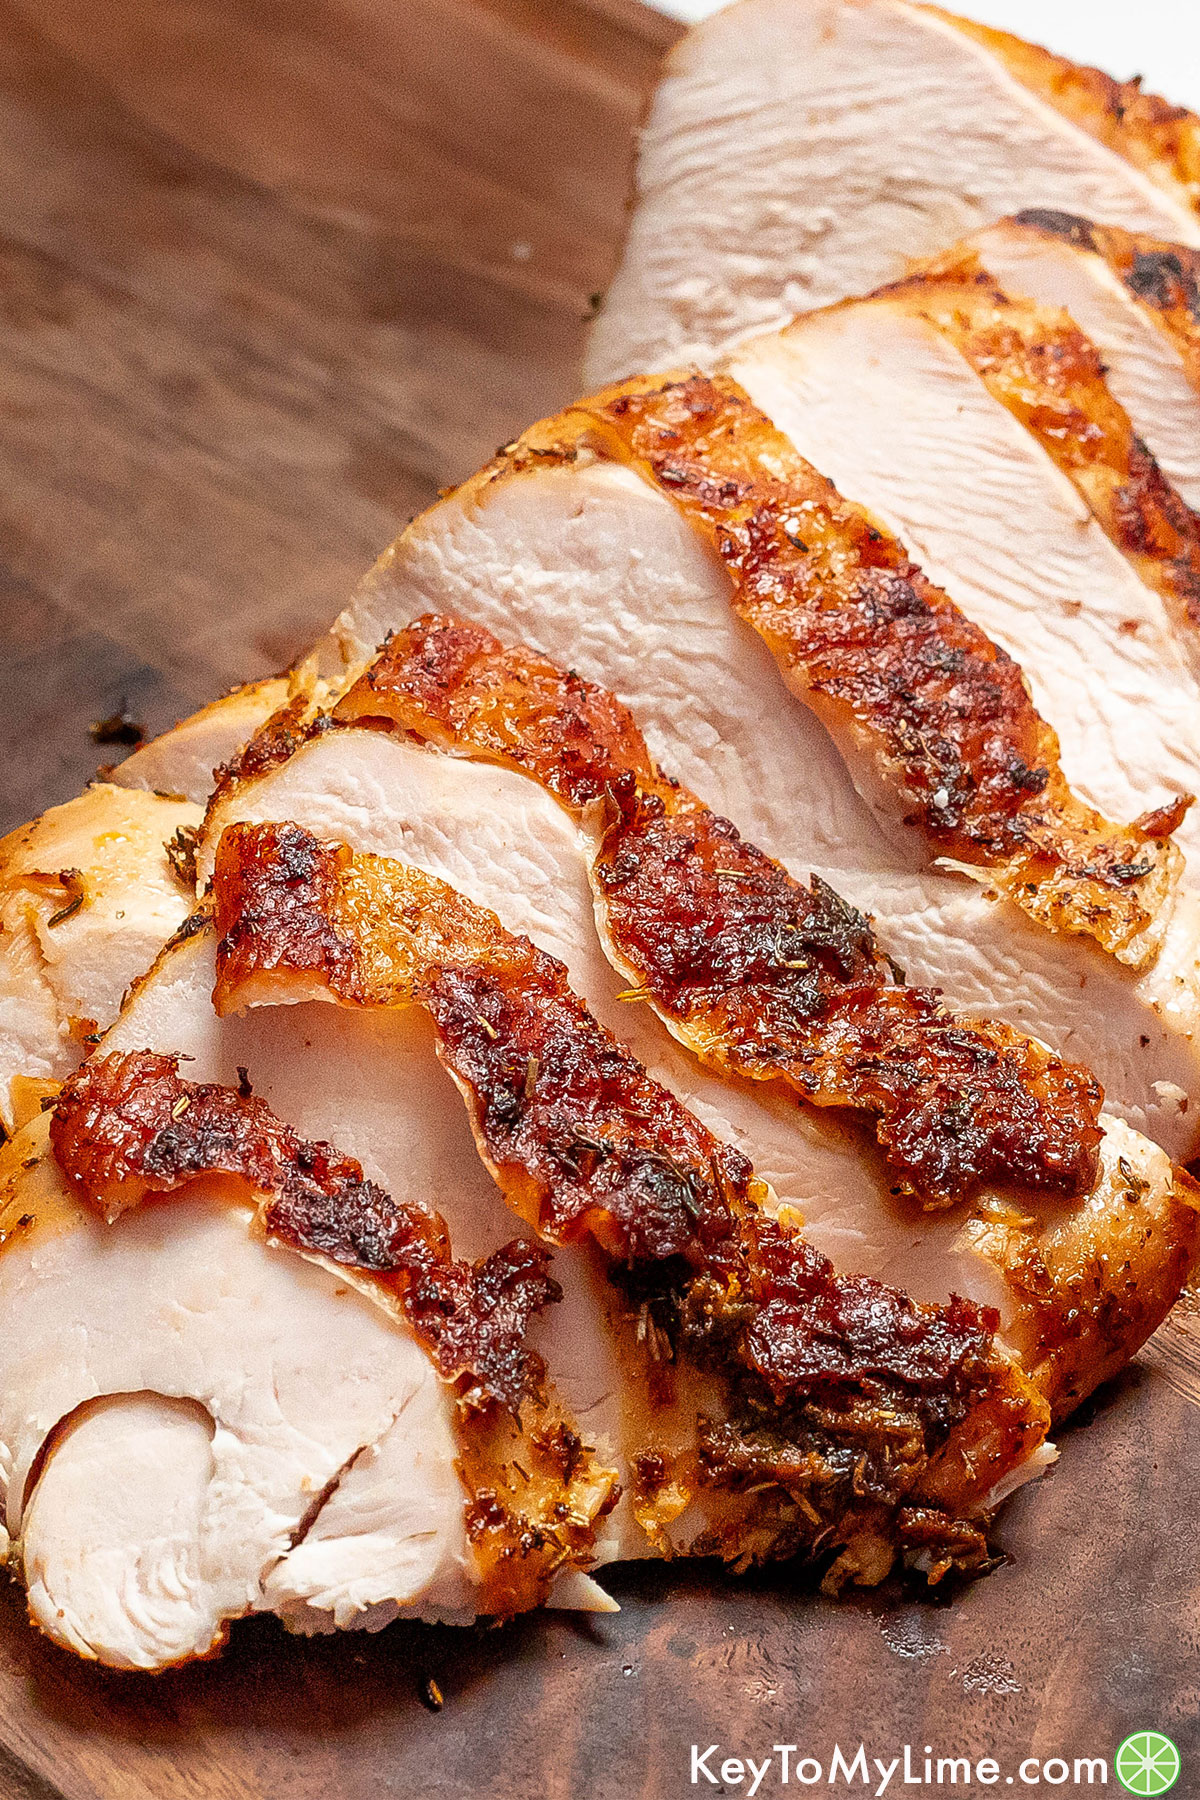 A brined turkey breast cooked and sliced on a cutting board.